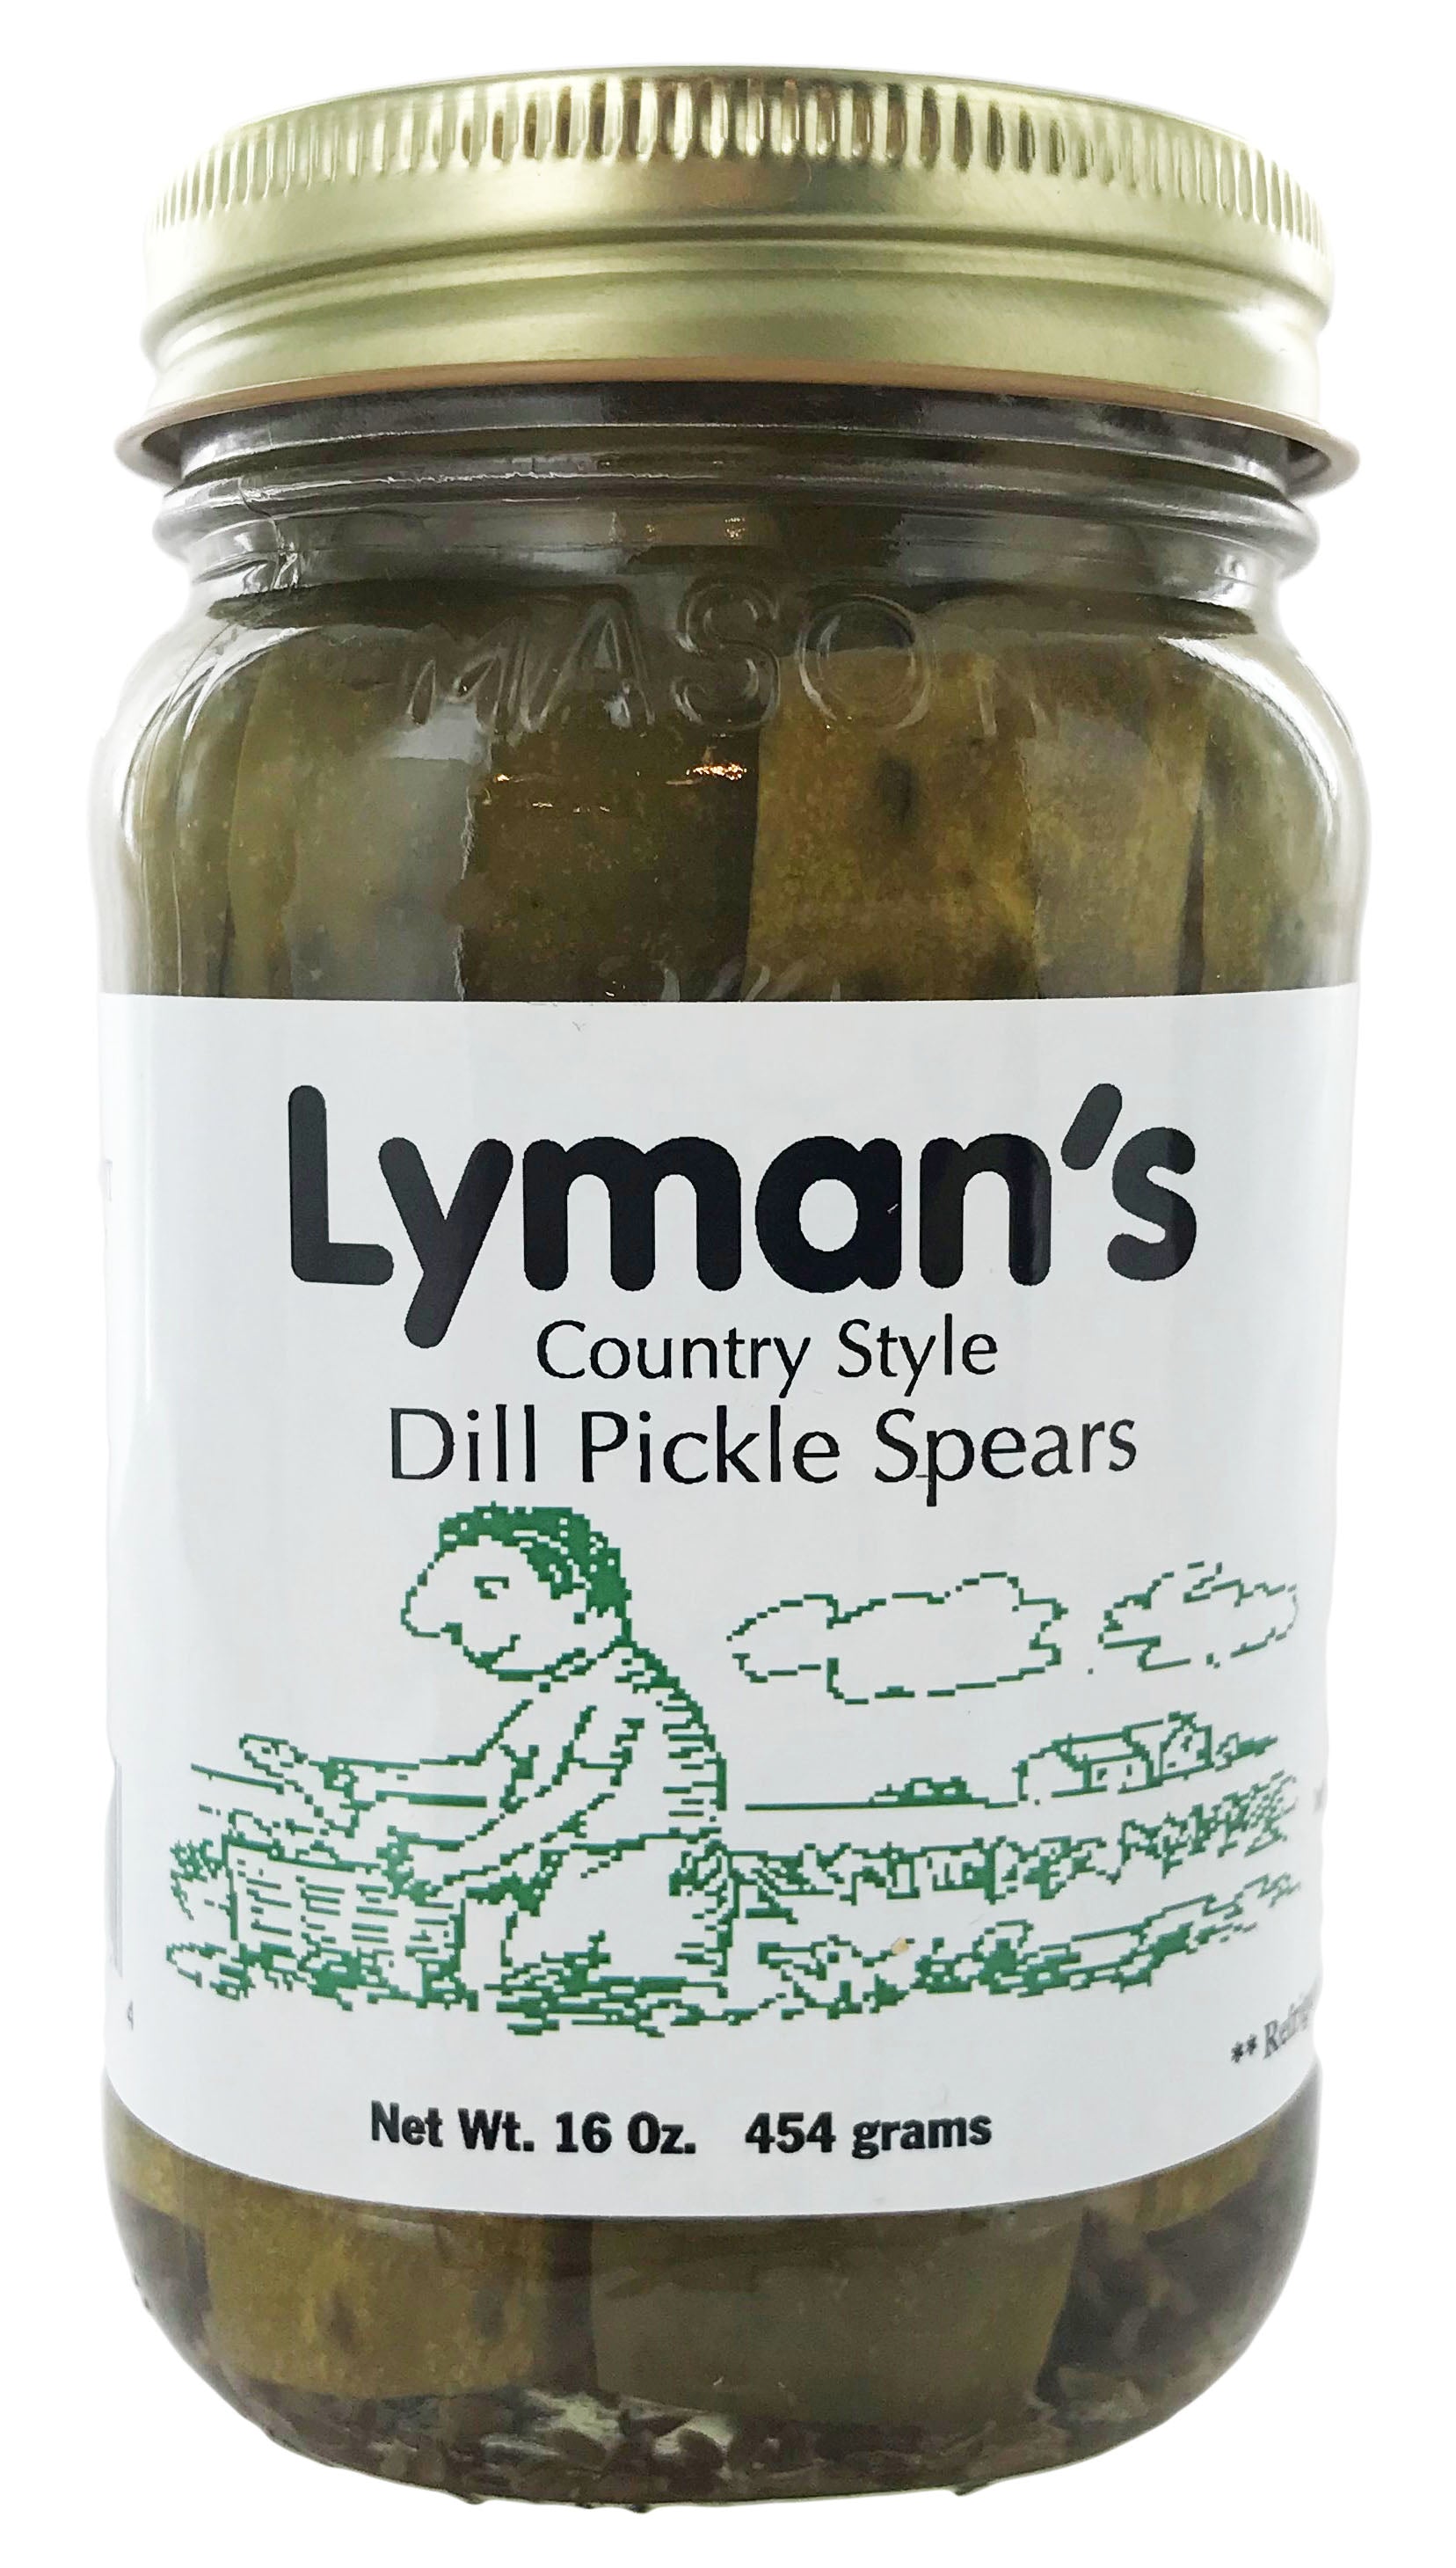 Pickle Pot — Country Store on Main